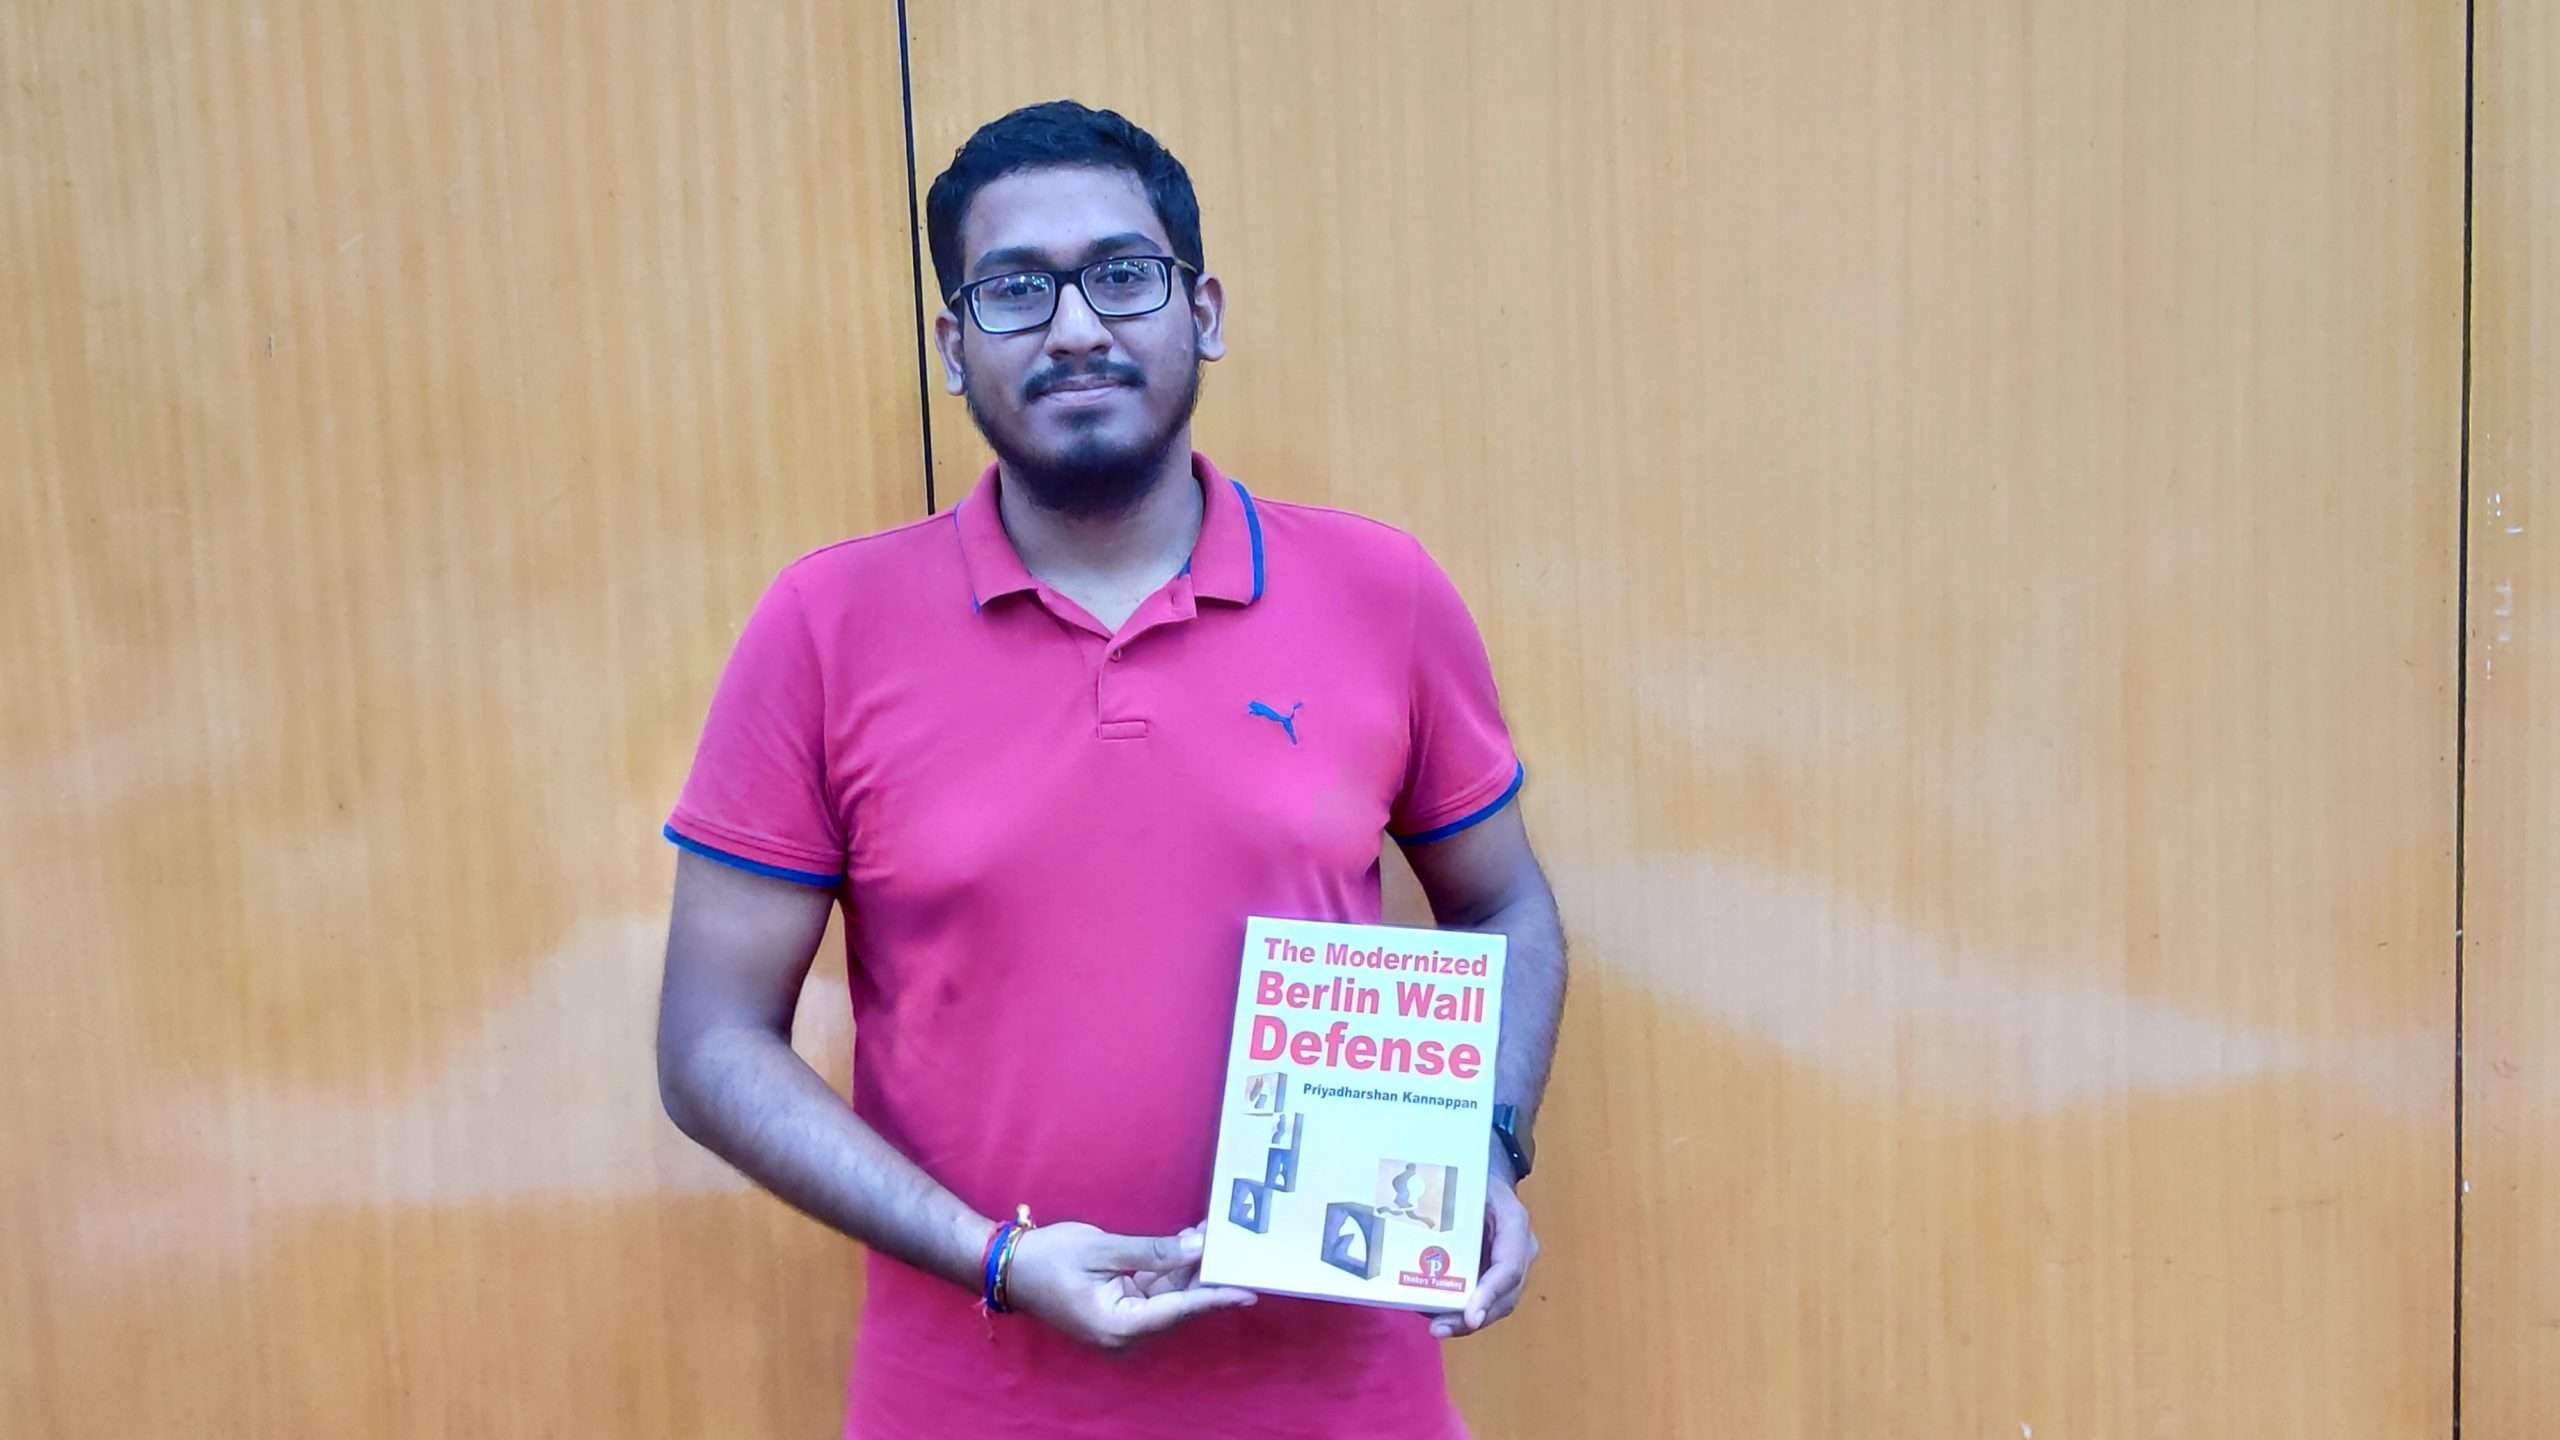 GM Priyadharshan Kannappan founder of Chess Gaja with his best selling book "The Modernized Berlin Wall Defense" published by Thinkers Publishing in 2019